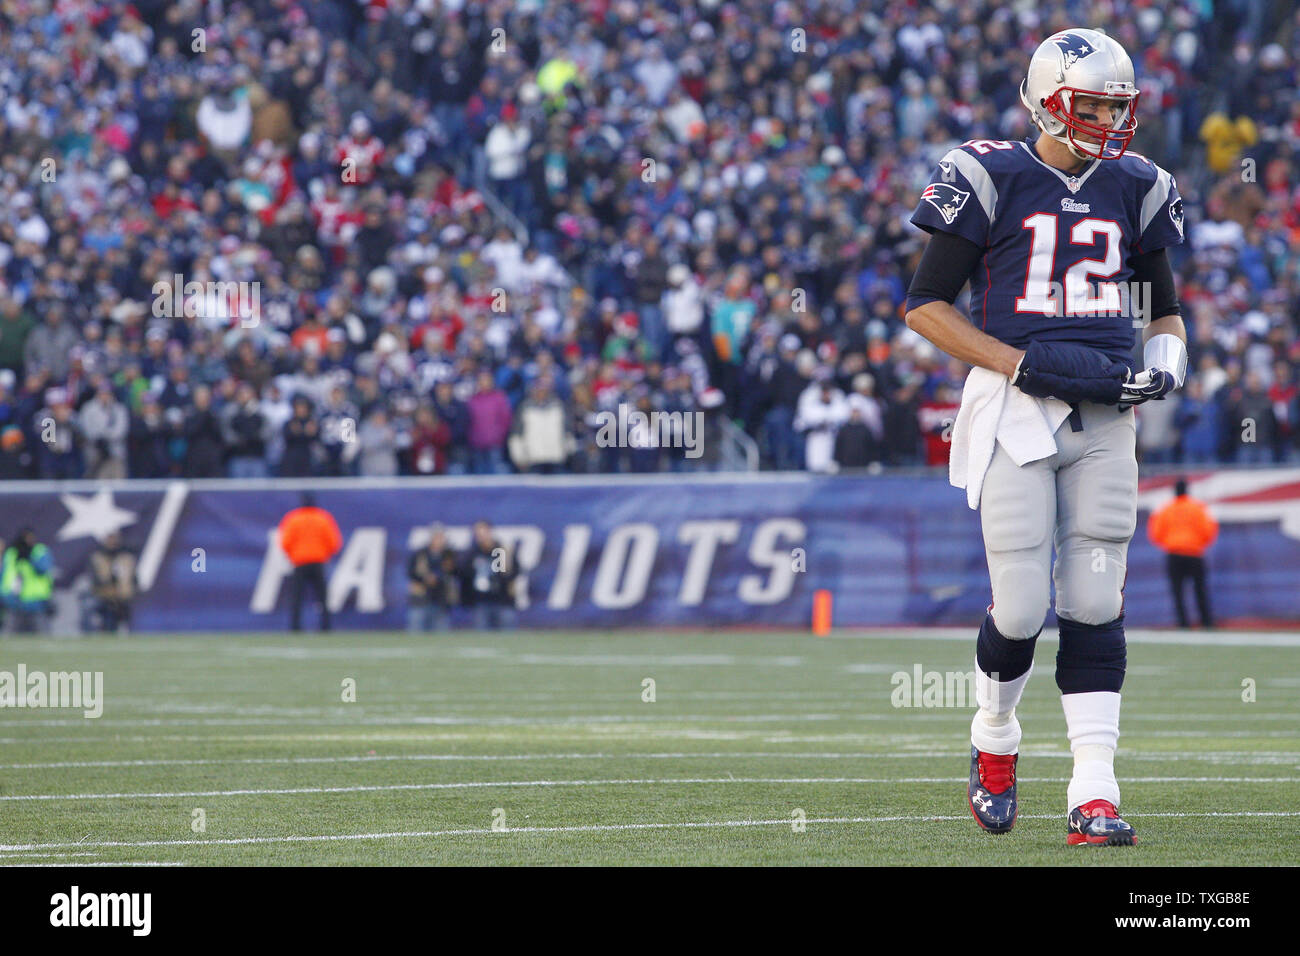 New England Patriots quarterback Tom Brady (12) walks on the field in the second quarter against the Miami Dolphins at Gillette Stadium in Foxborough, Massachusetts on December 14, 2014.  The Patriots defeated the Dolphins 41-13 and clinched the AFC East.   UPI/Matthew Healey Stock Photo